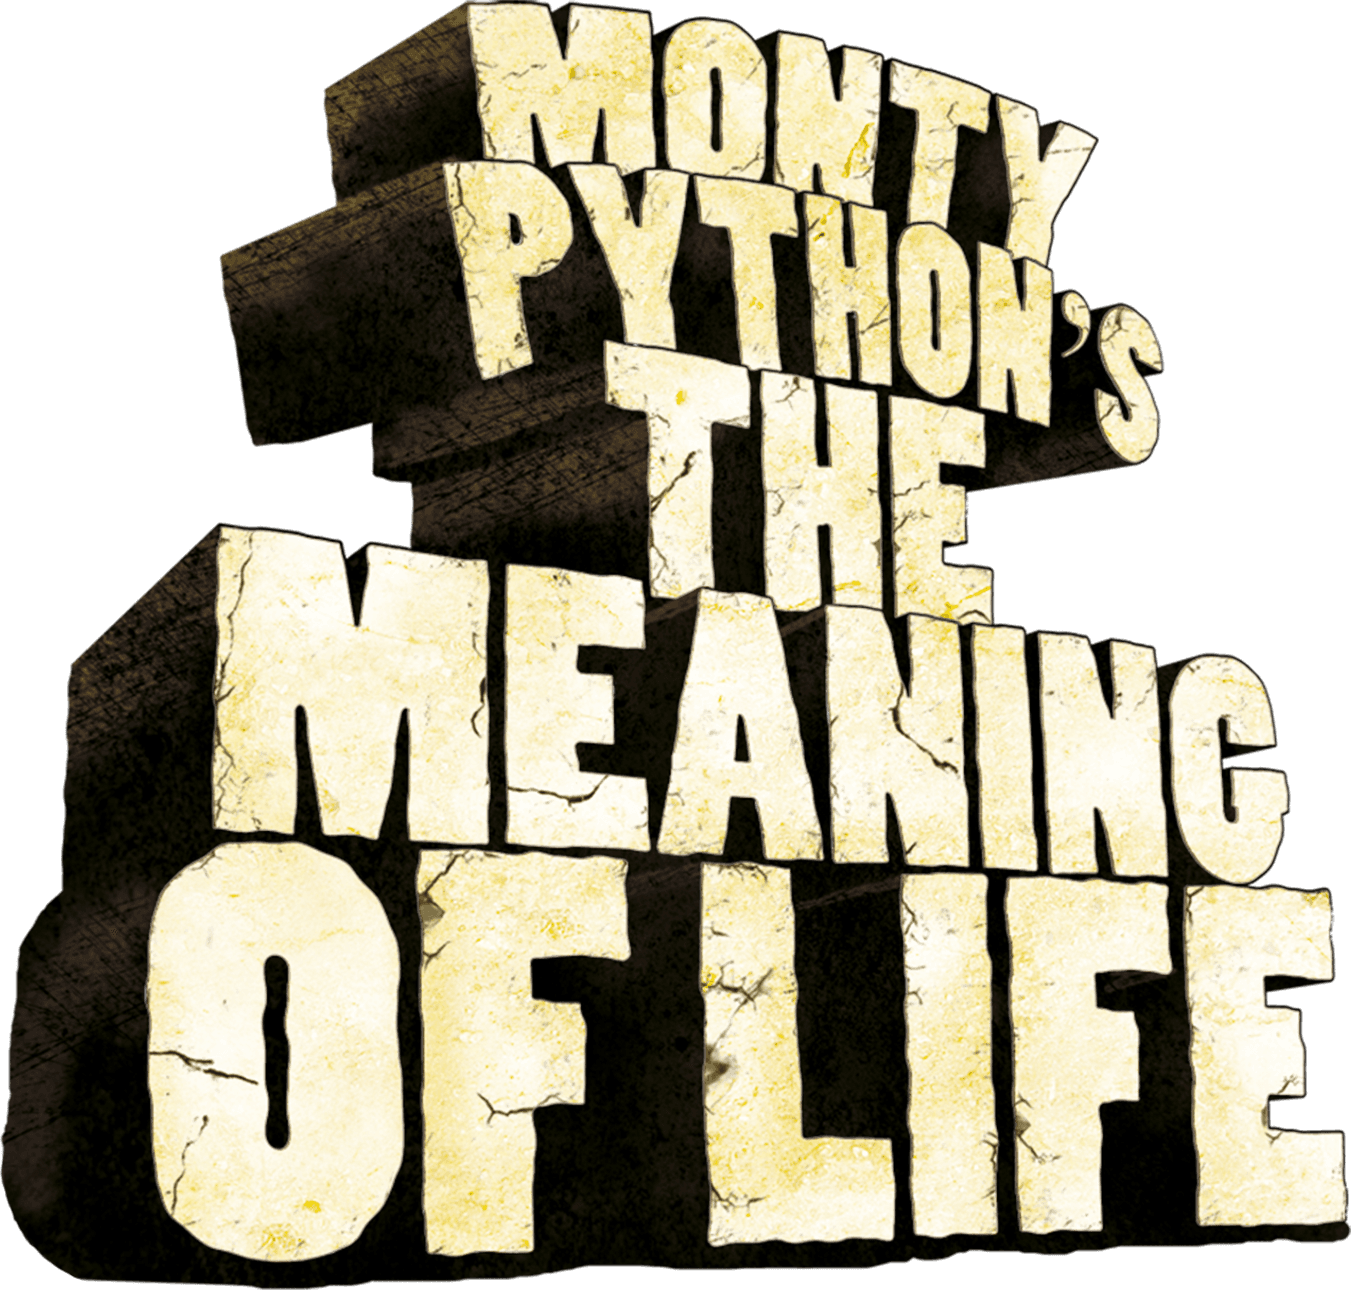 Monty Python's The Meaning of Life logo